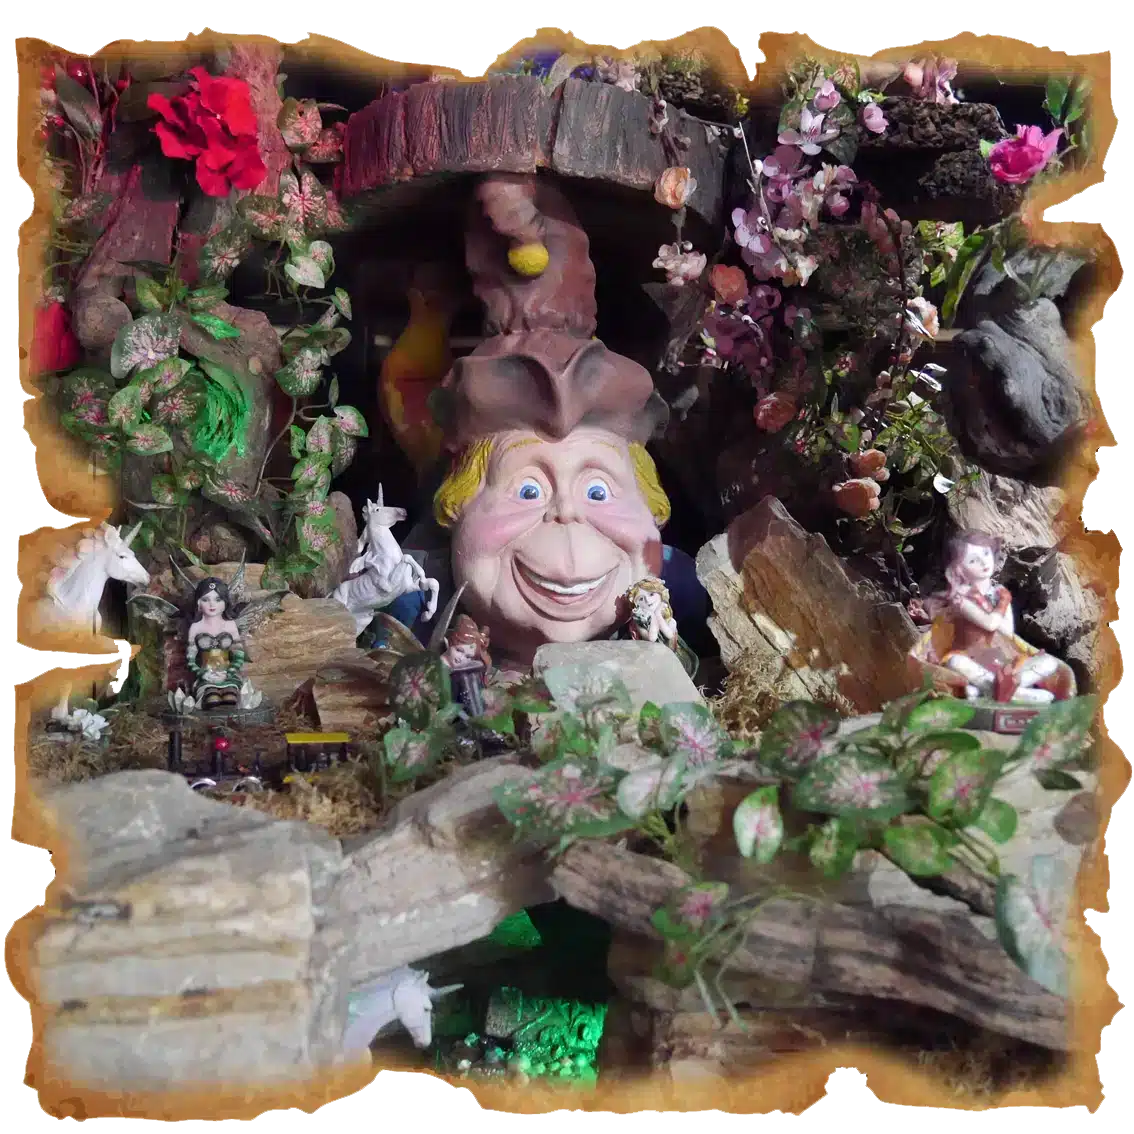 The miniature fairy world at the Gulliver attraction in Fantassia Park